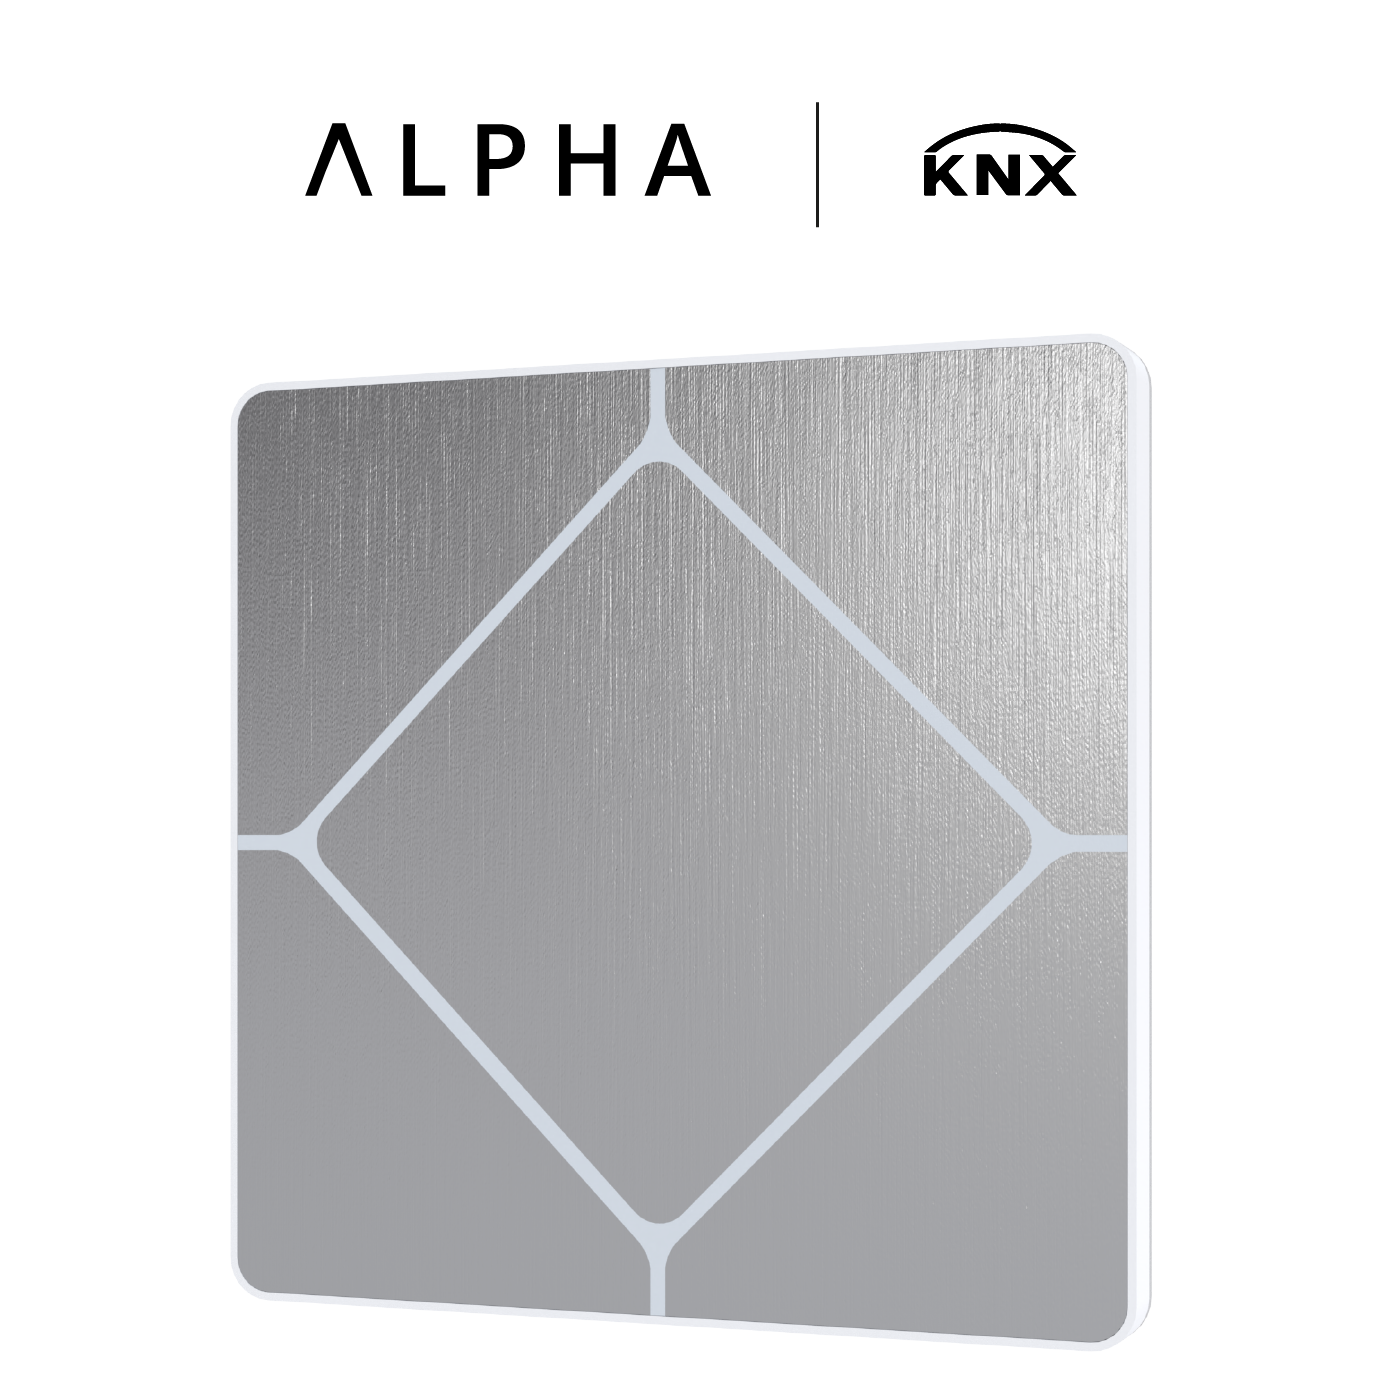 TAP-5 ALPHA BRUSHED STAINLESS STEEL - KNX